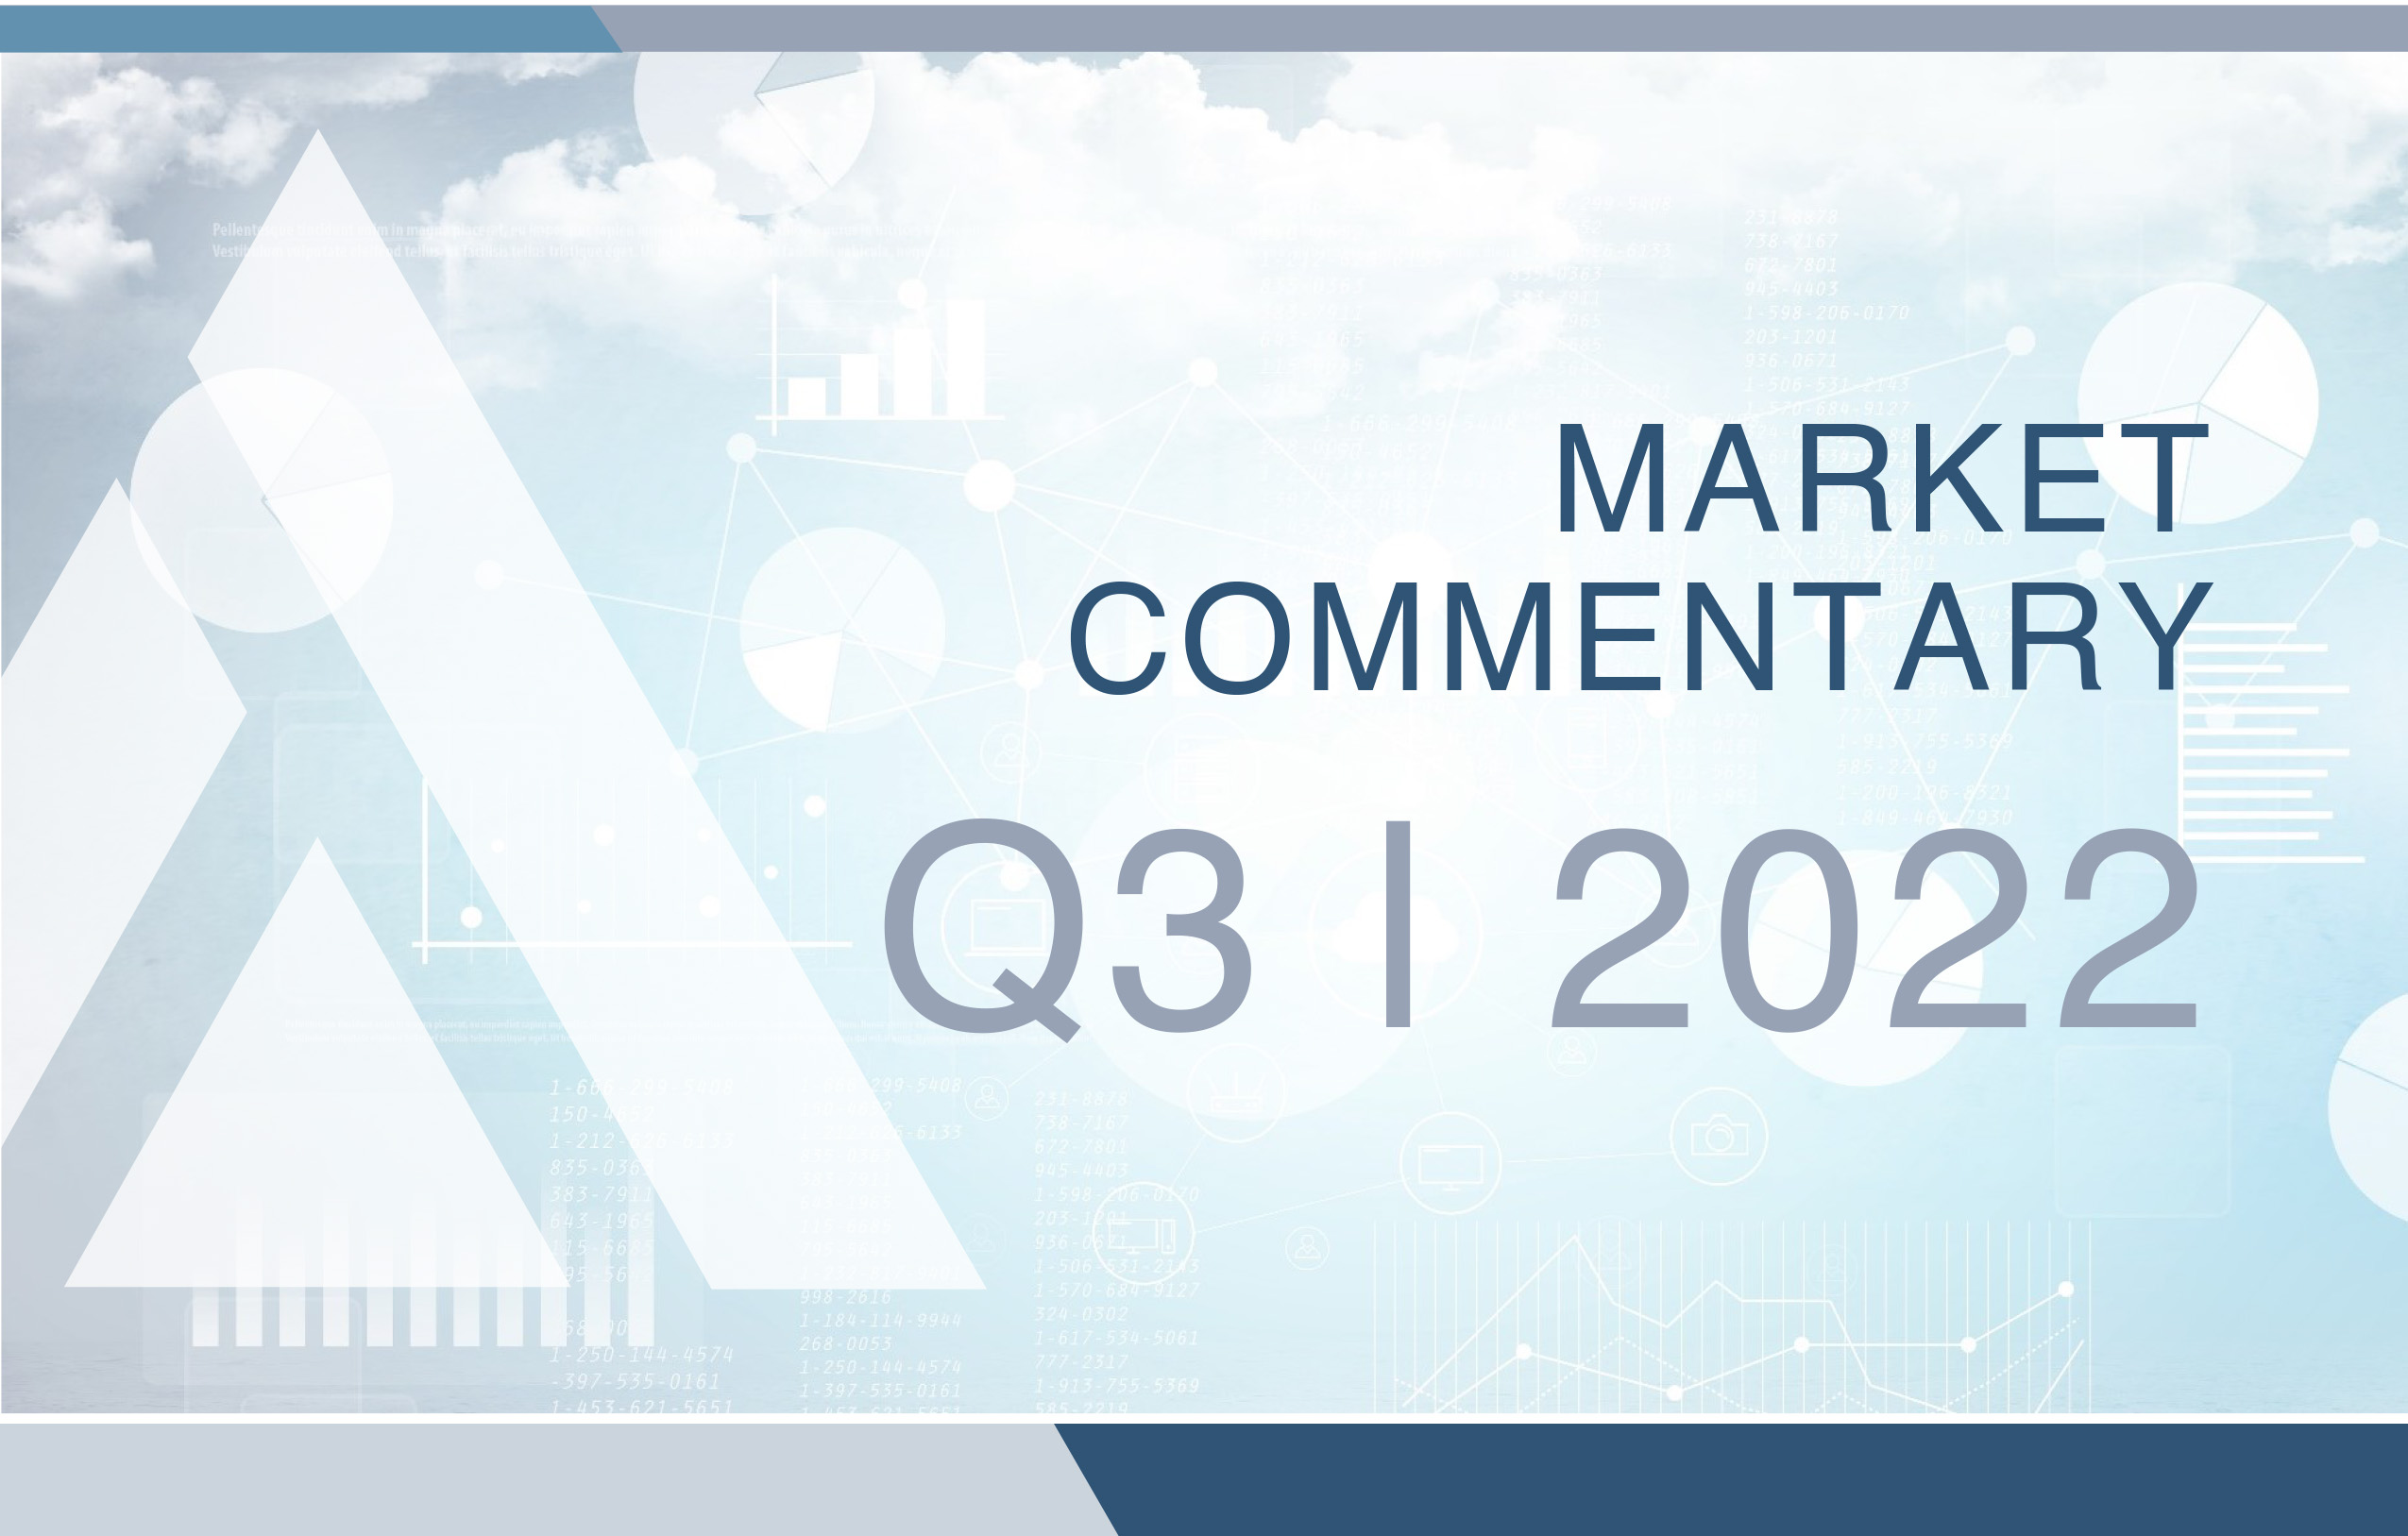 Market Commentary Q3 | 2022